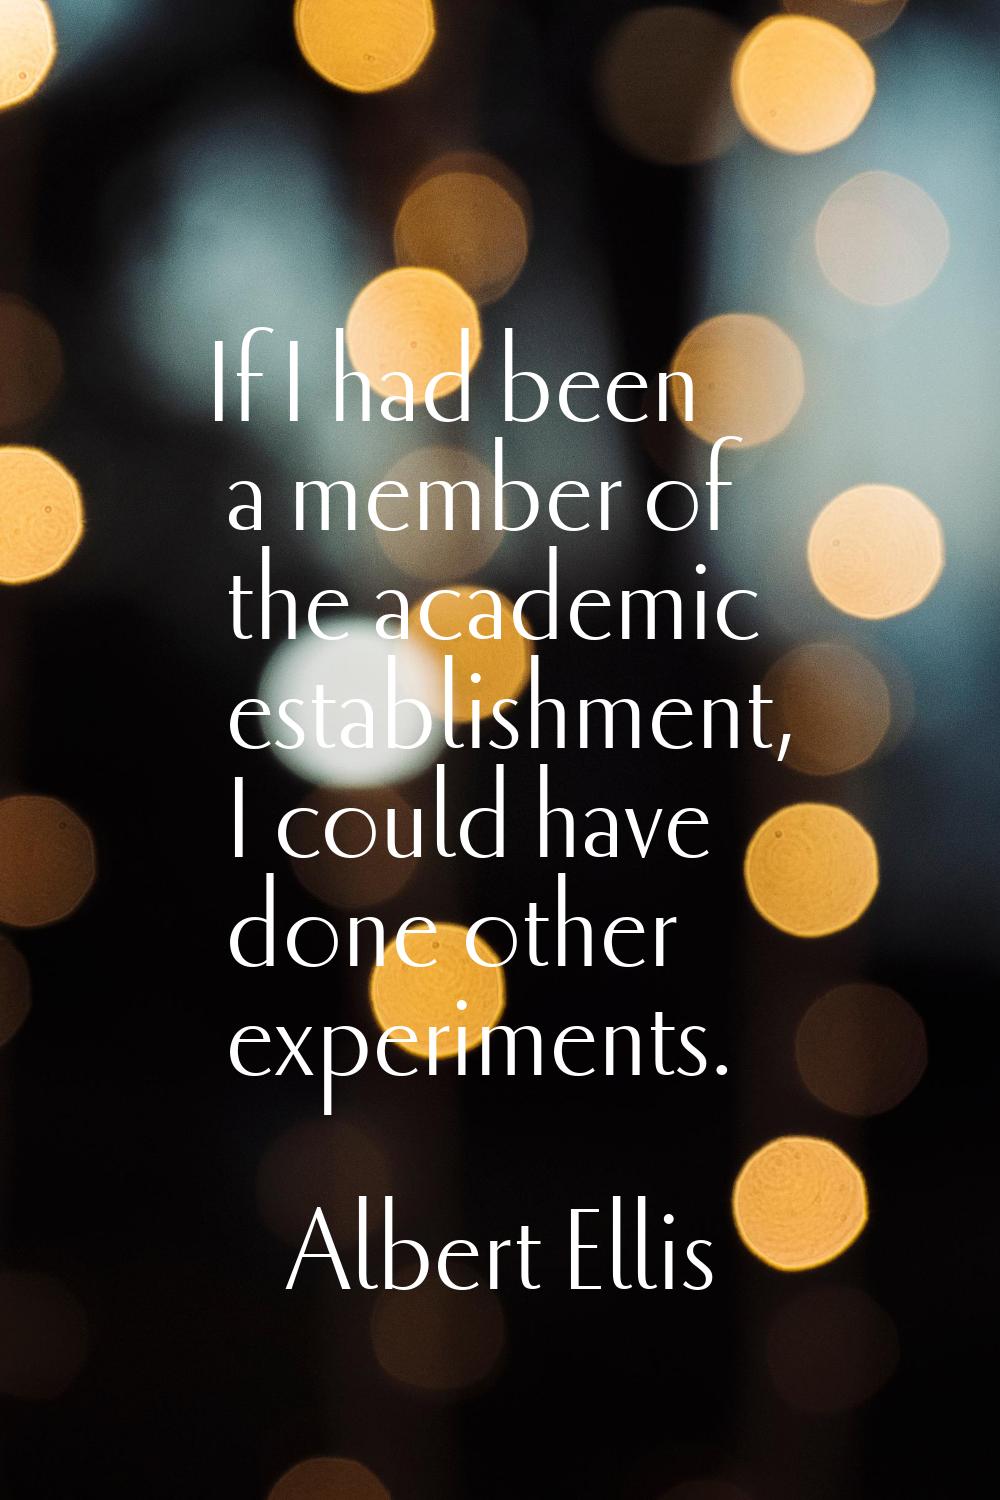 If I had been a member of the academic establishment, I could have done other experiments.